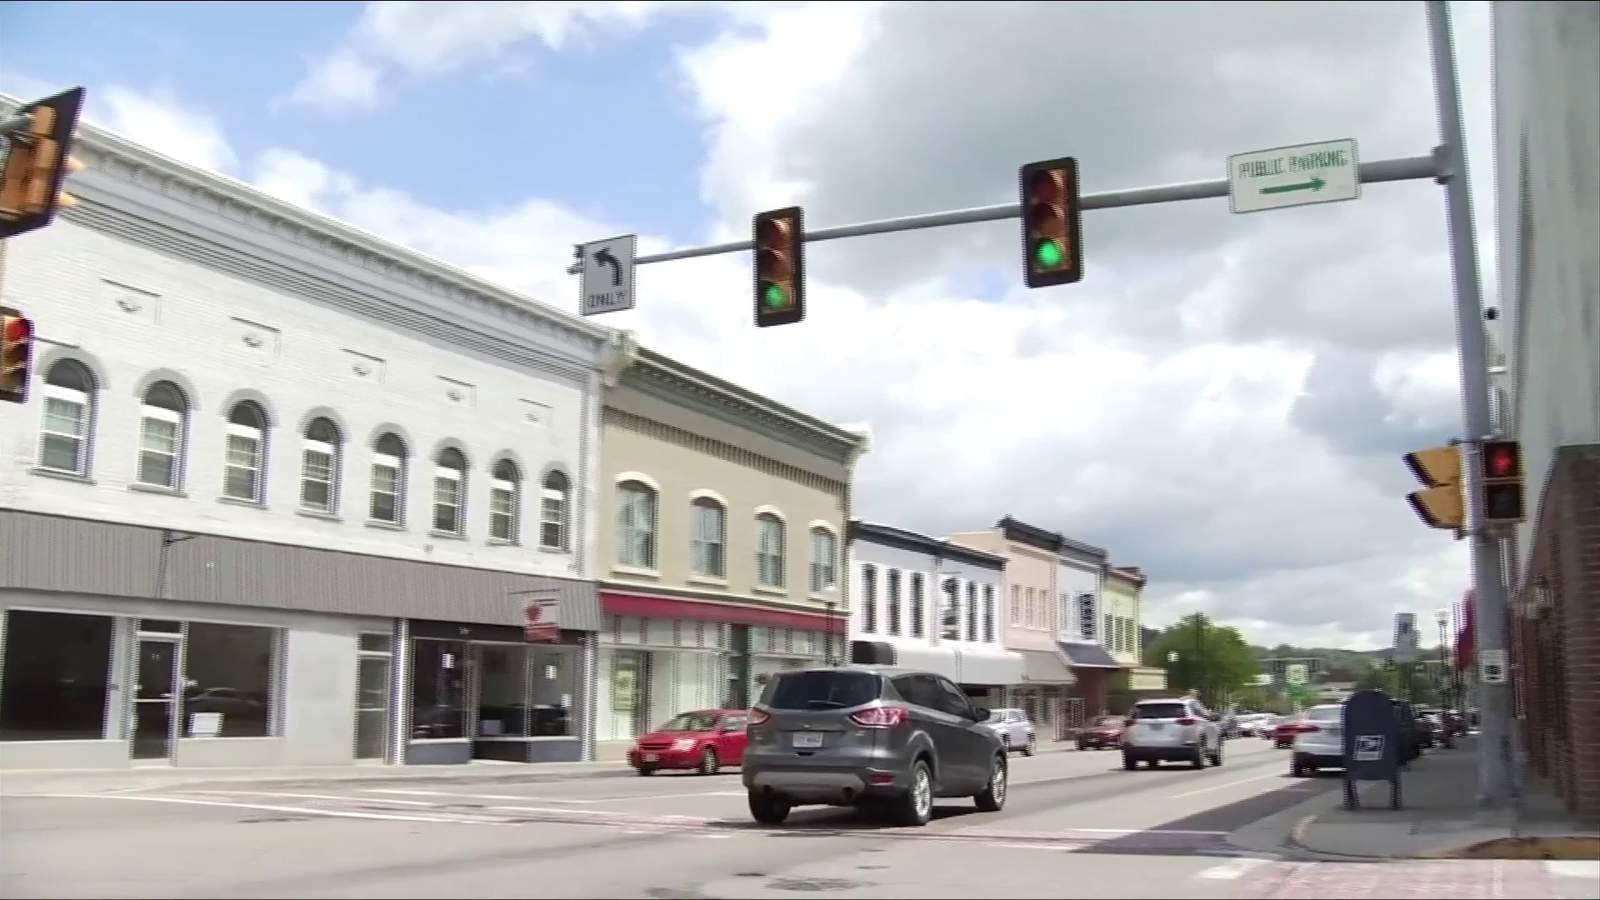 'They’ve had so many challenges’: Radford city leaders take steps to help local businesses